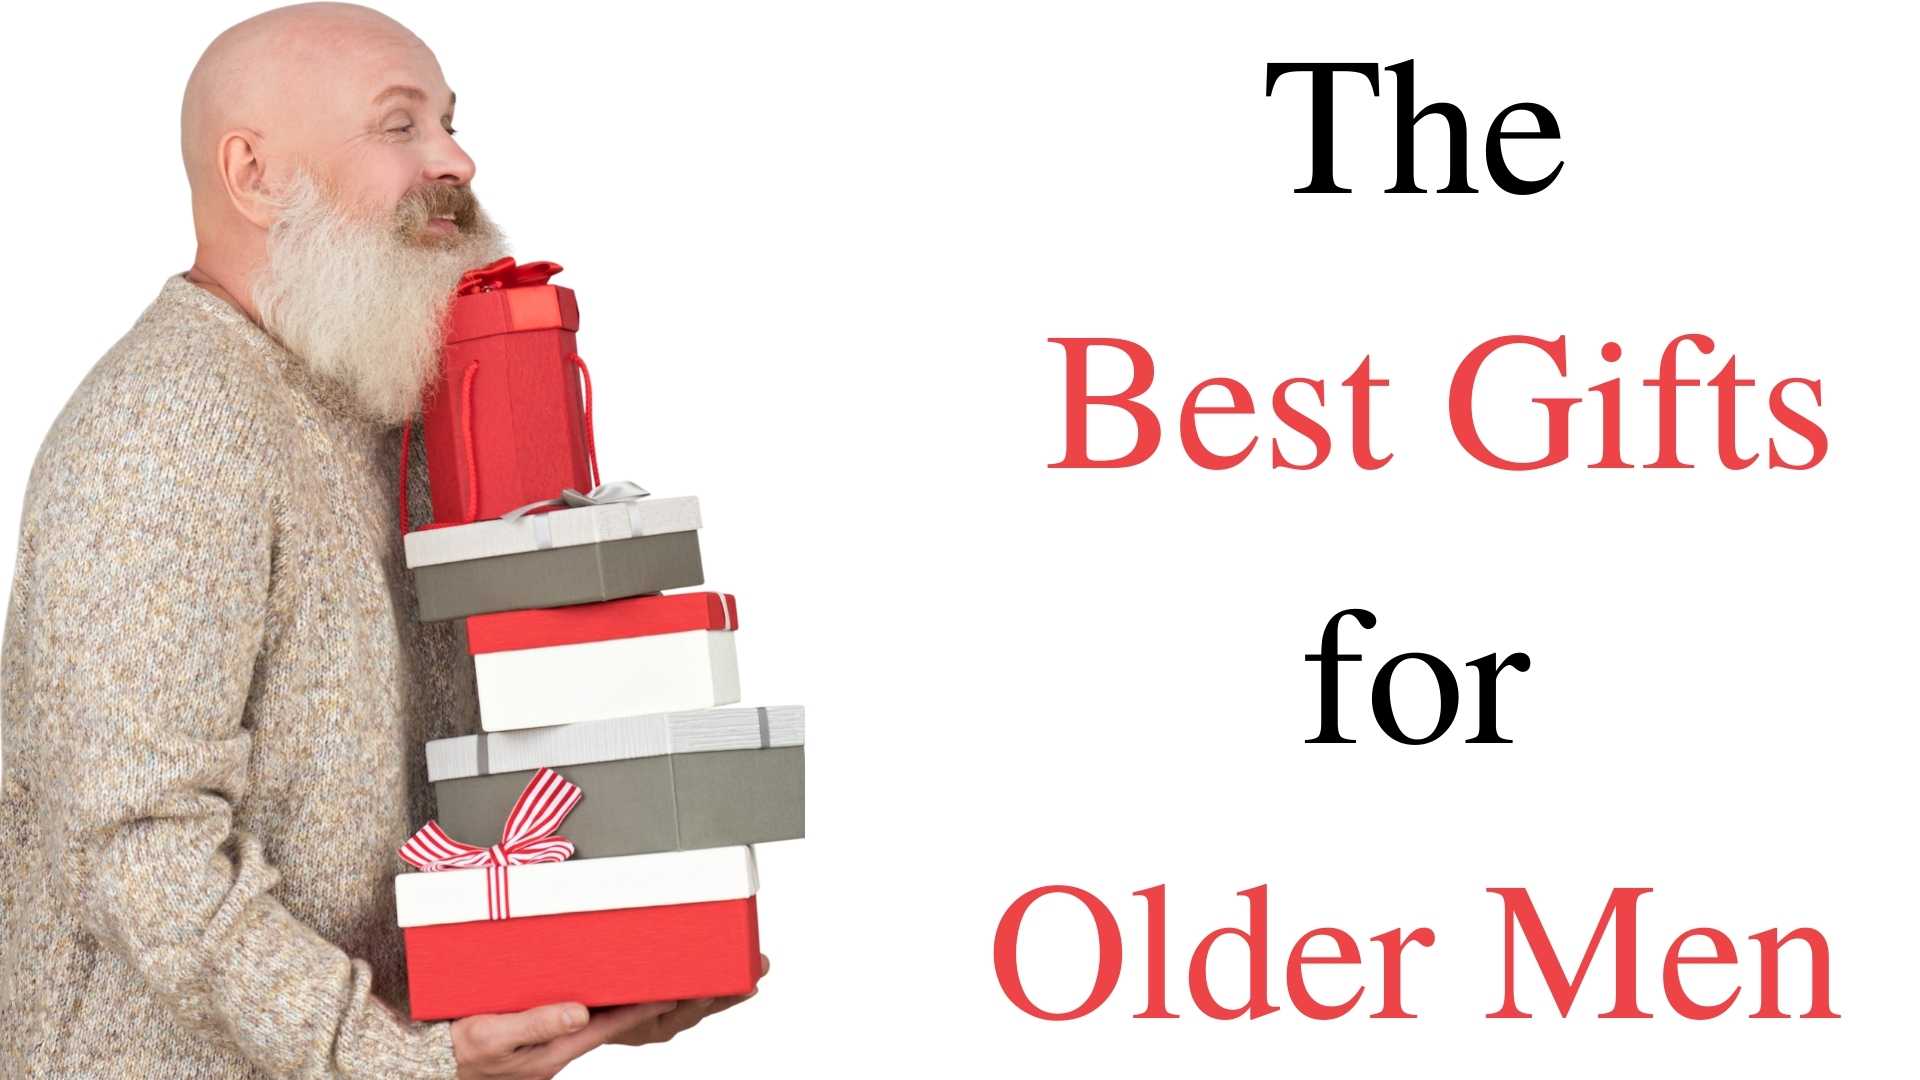 Best Gifts for Older Men Feature Image